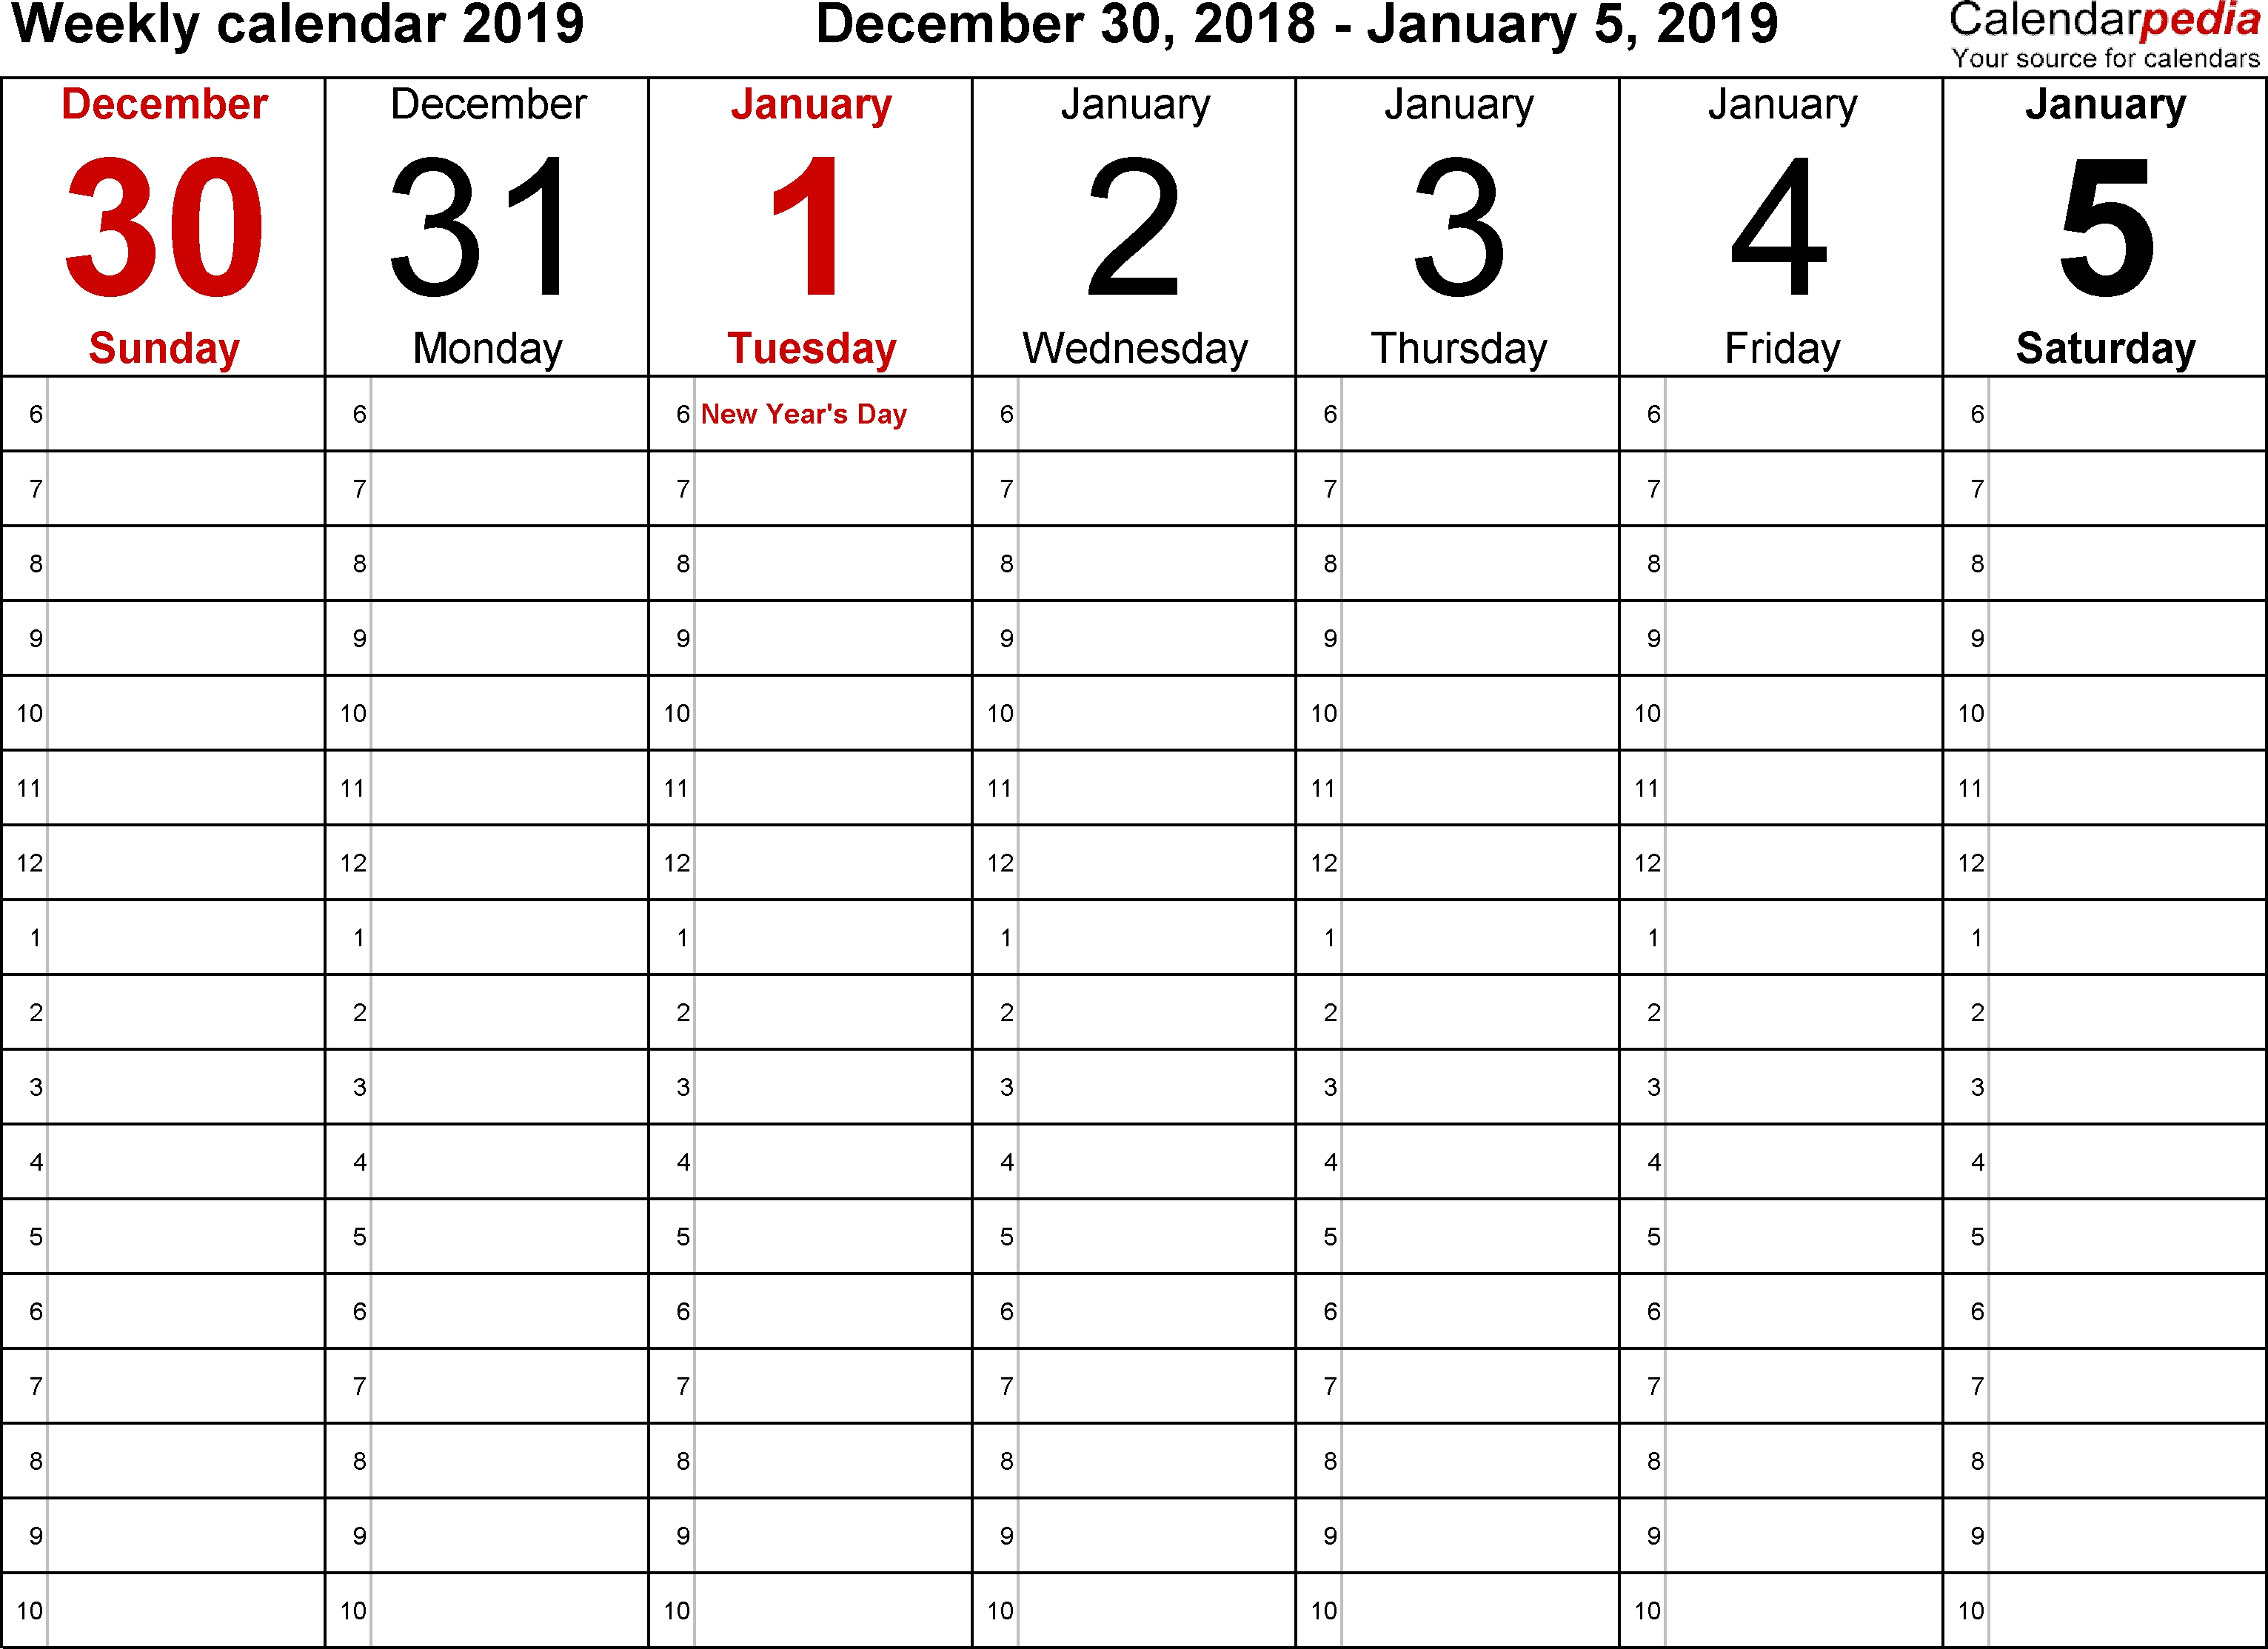 Weekly Calendar 2019 For Word - 12 Free Printable Templates pertaining to 30 Day Calendar With Circle With A Line Thru It